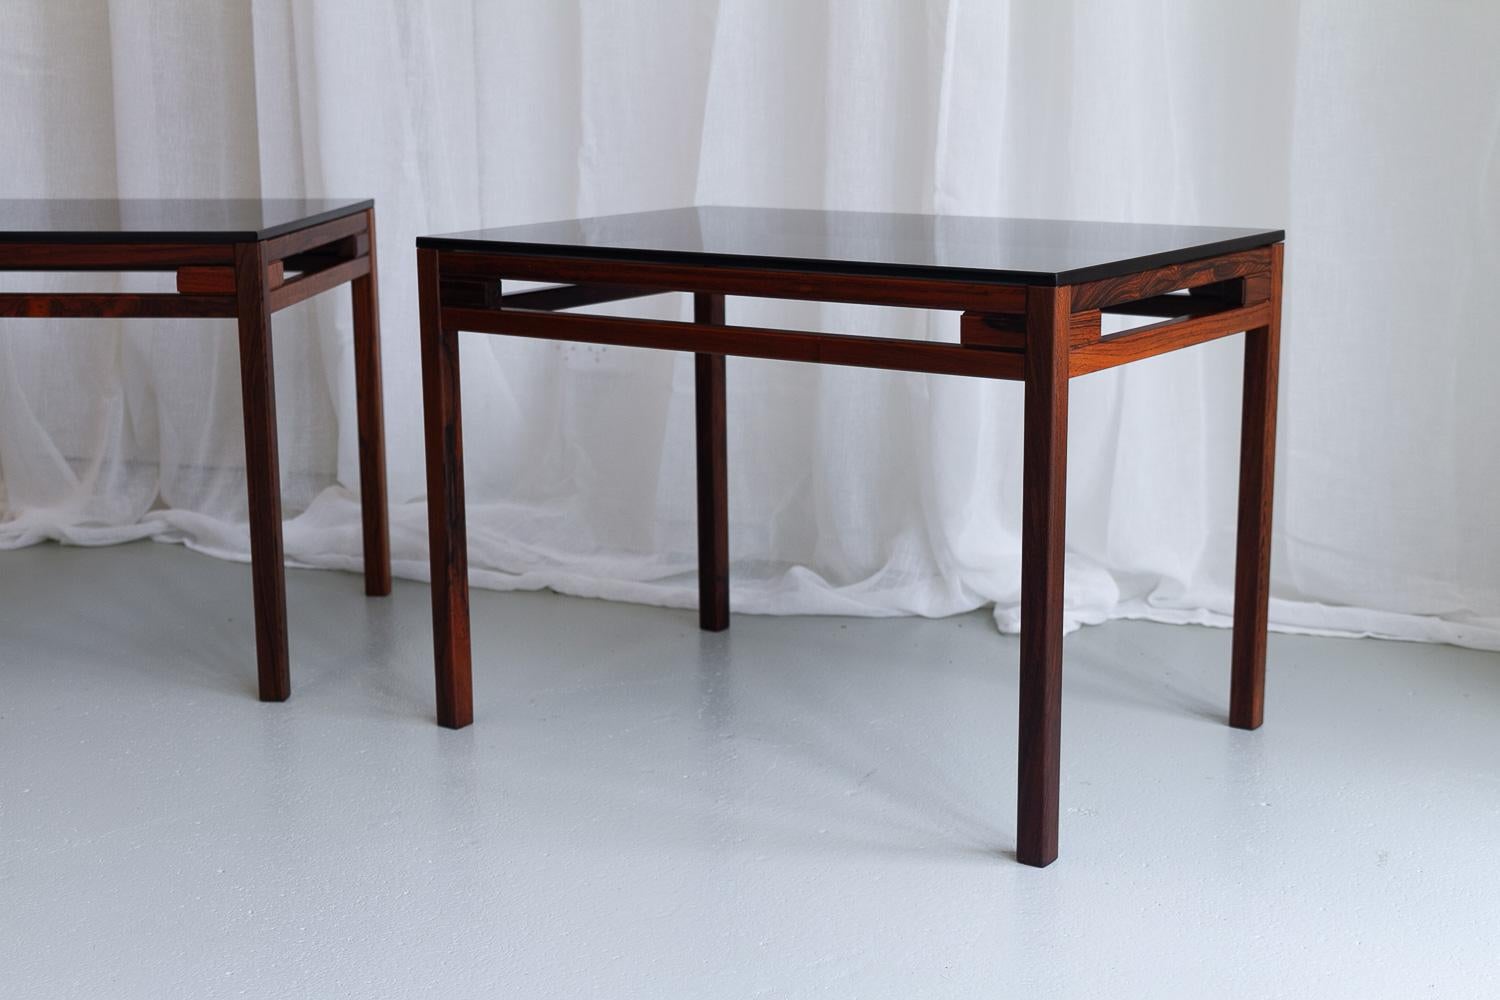 Scandinavian Modern Danish Modern Side Tables in Rosewood and Glass, 1960s. Set of 2. For Sale